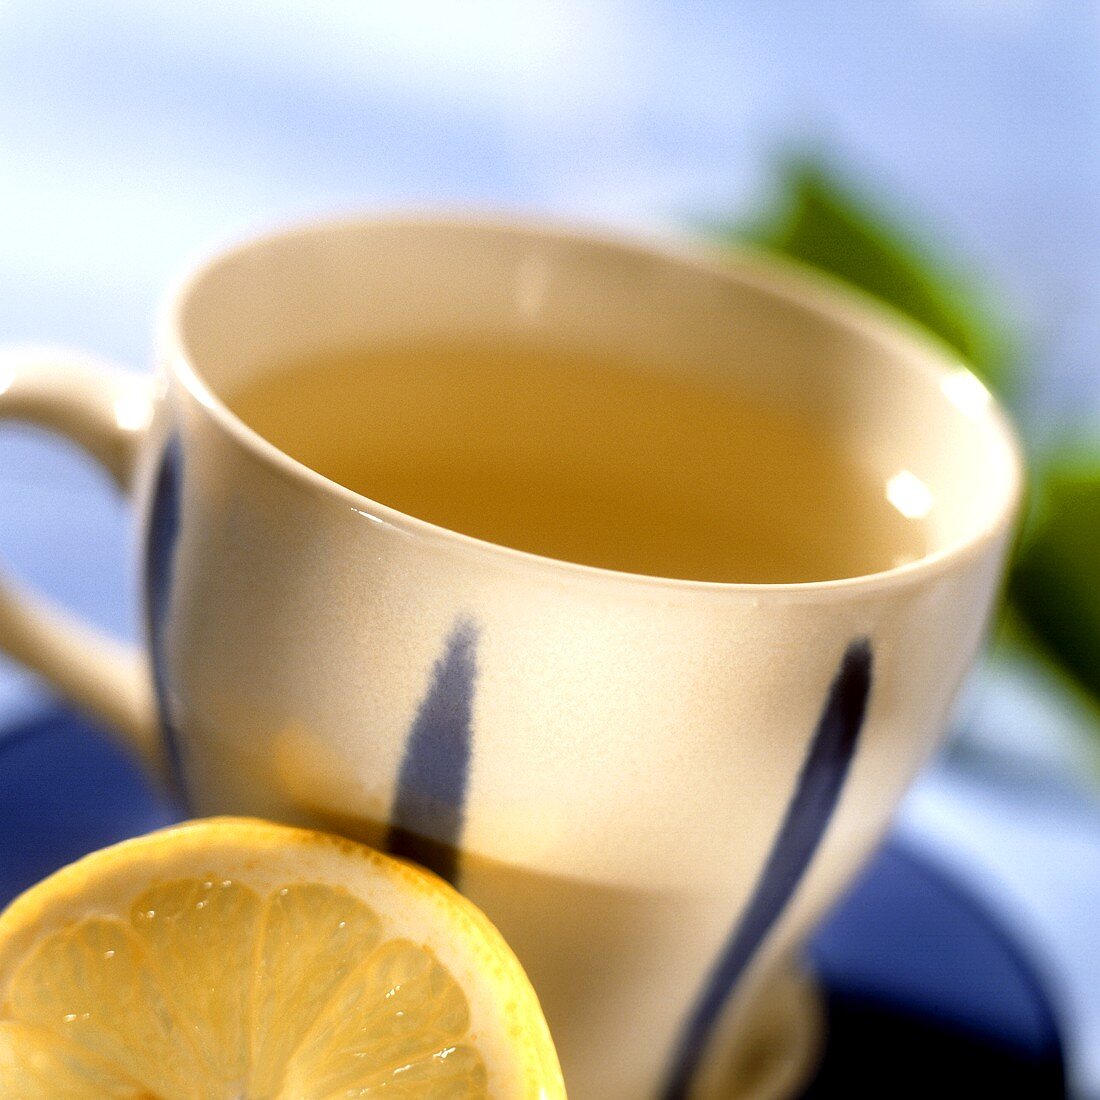 Herb tea with lemon in blue and white cup